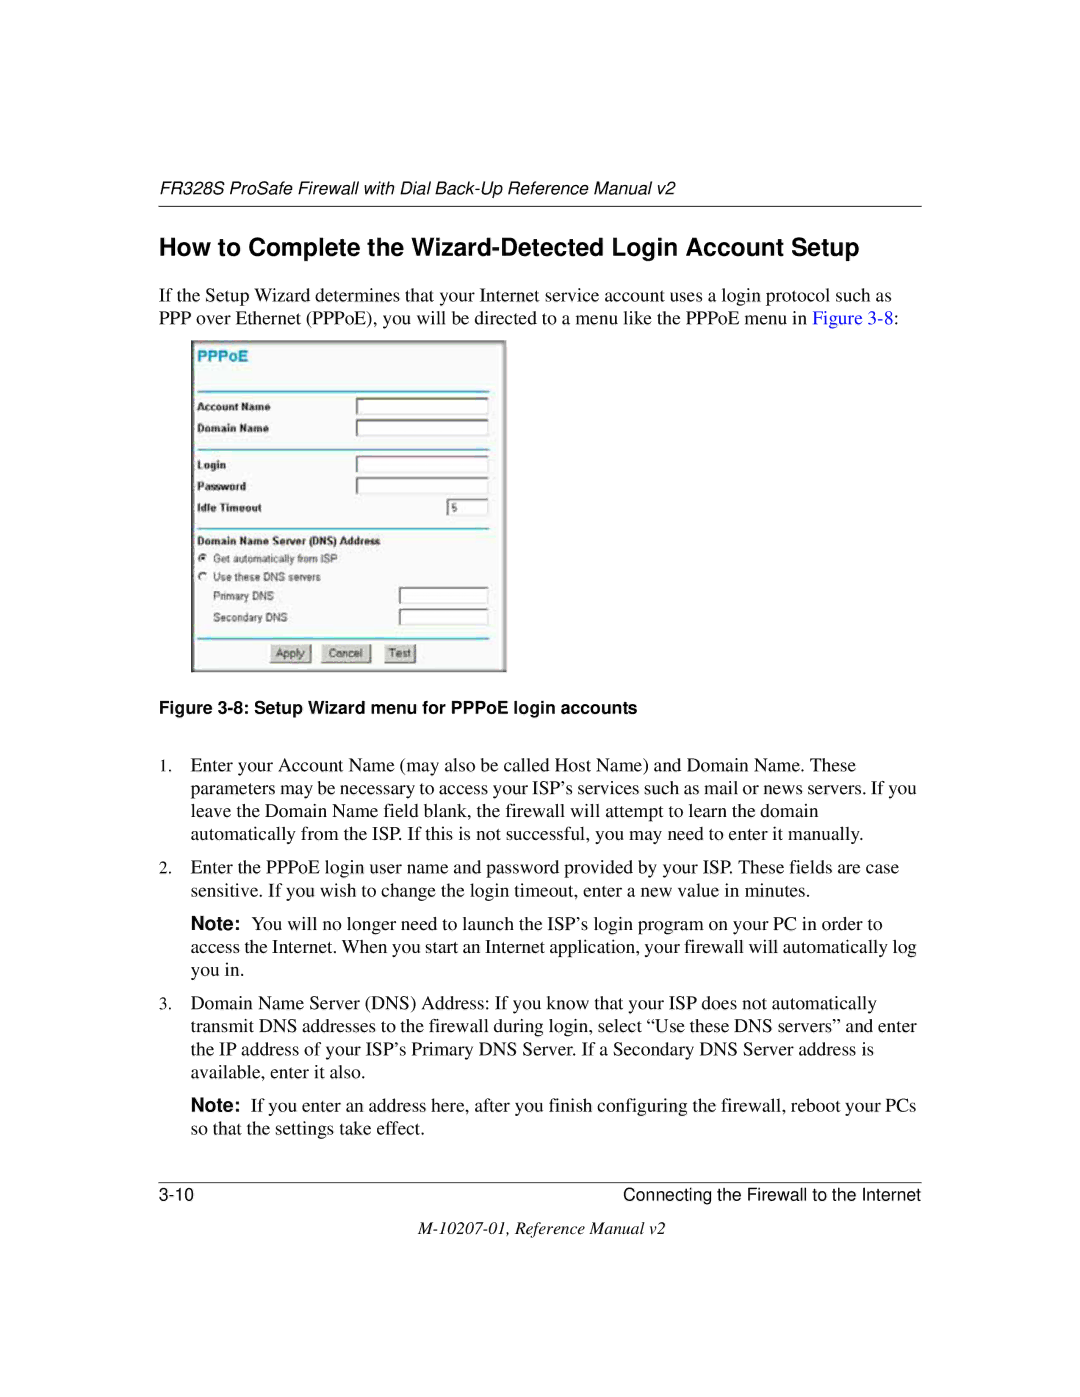 NETGEAR FR328S manual How to Complete the Wizard-Detected Login Account Setup, Setup Wizard menu for PPPoE login accounts 